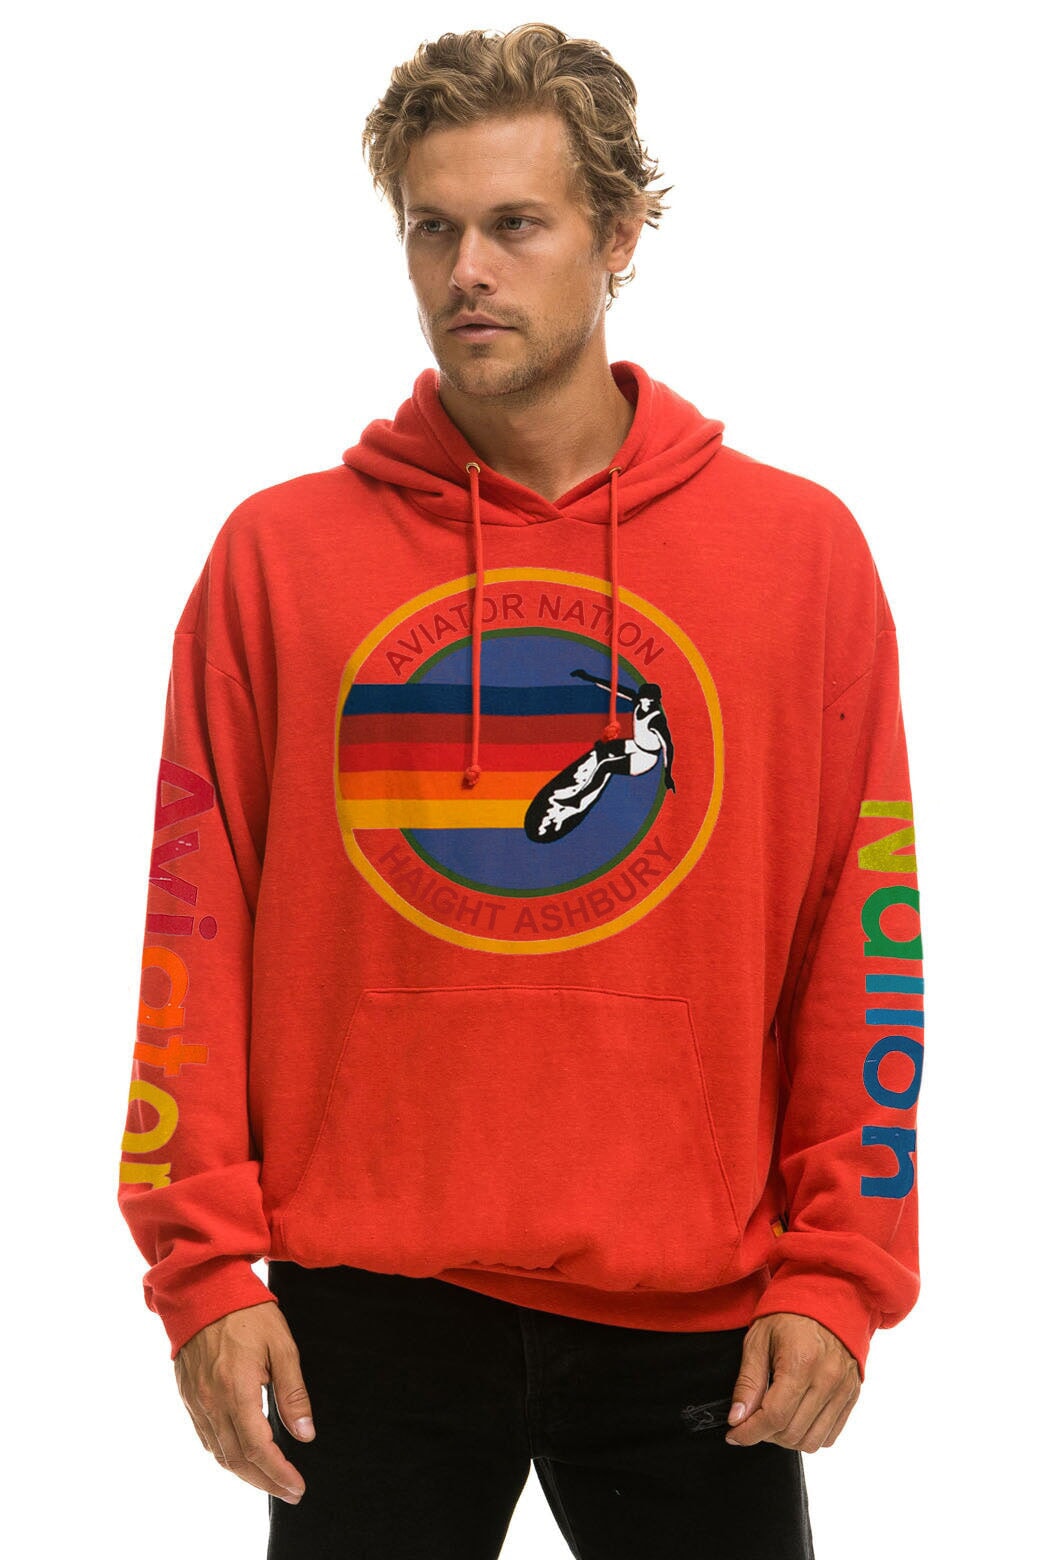 AVIATOR NATION HAIGHT ASHBURY RELAXED PULLOVER HOODIE - RED Hoodie Aviator Nation 